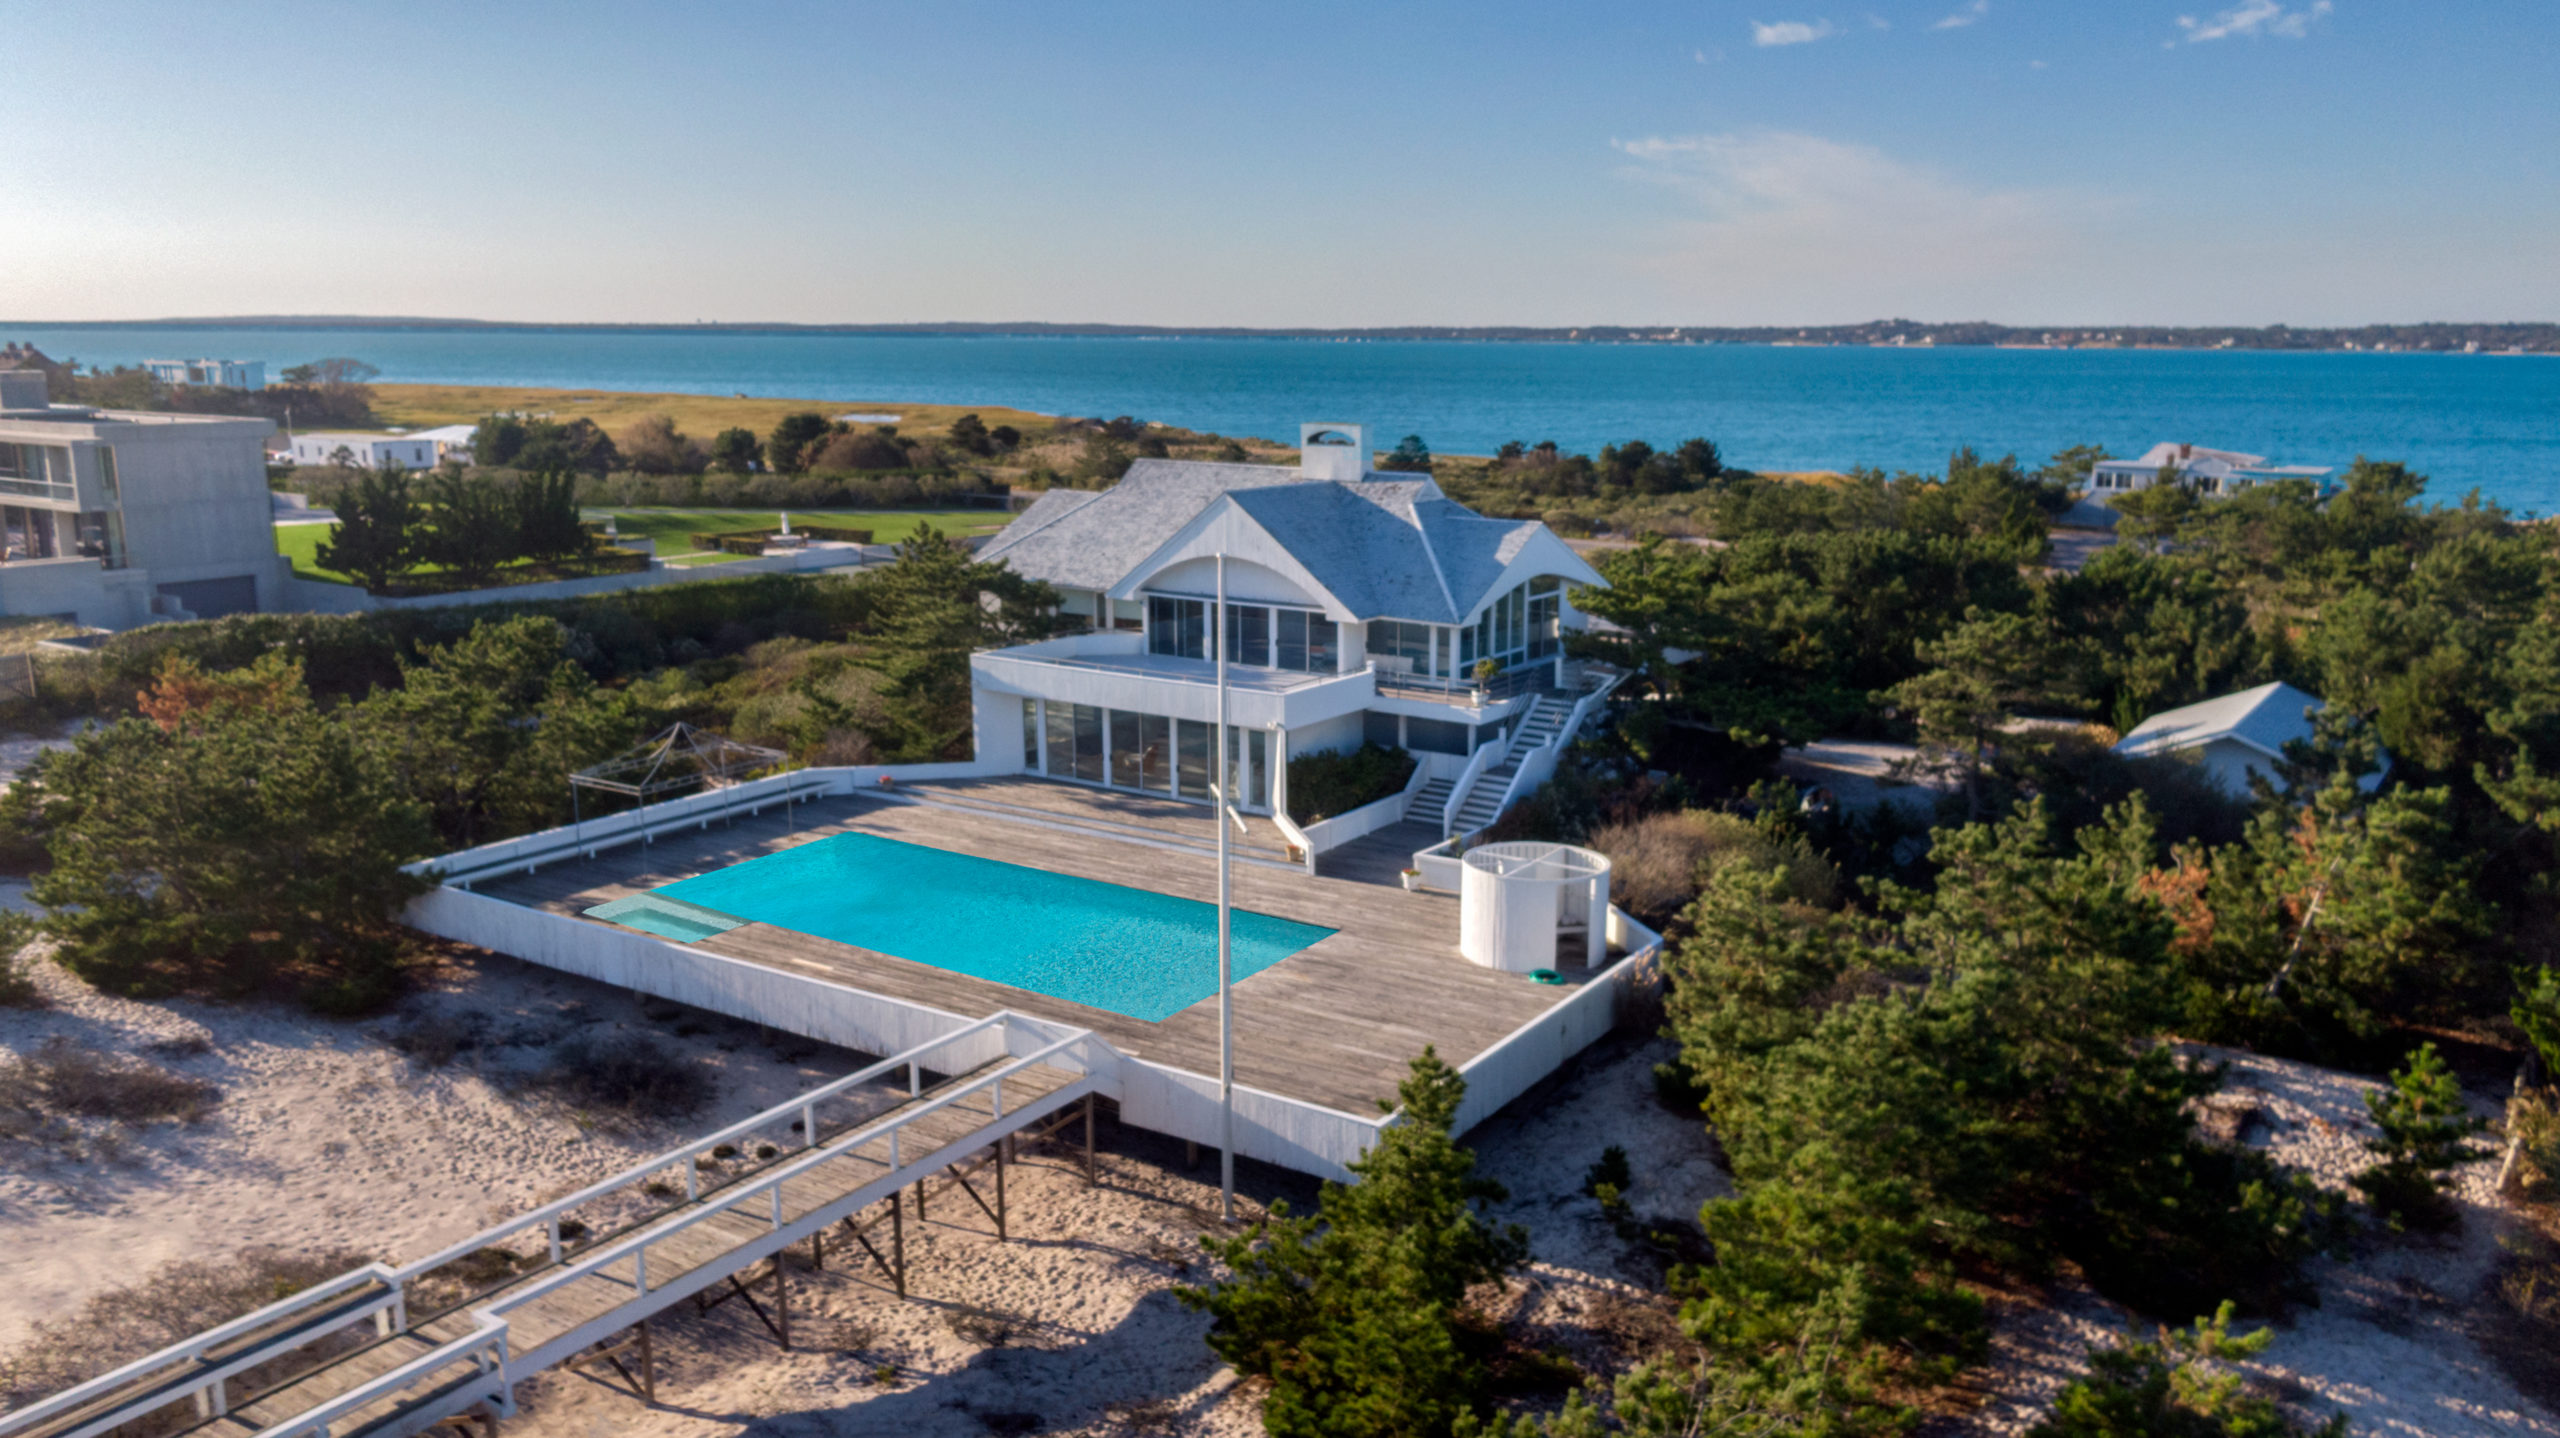 In Southampton Village, 1210 Meadow Lane recently entered contract with a last asking price of $37 million.